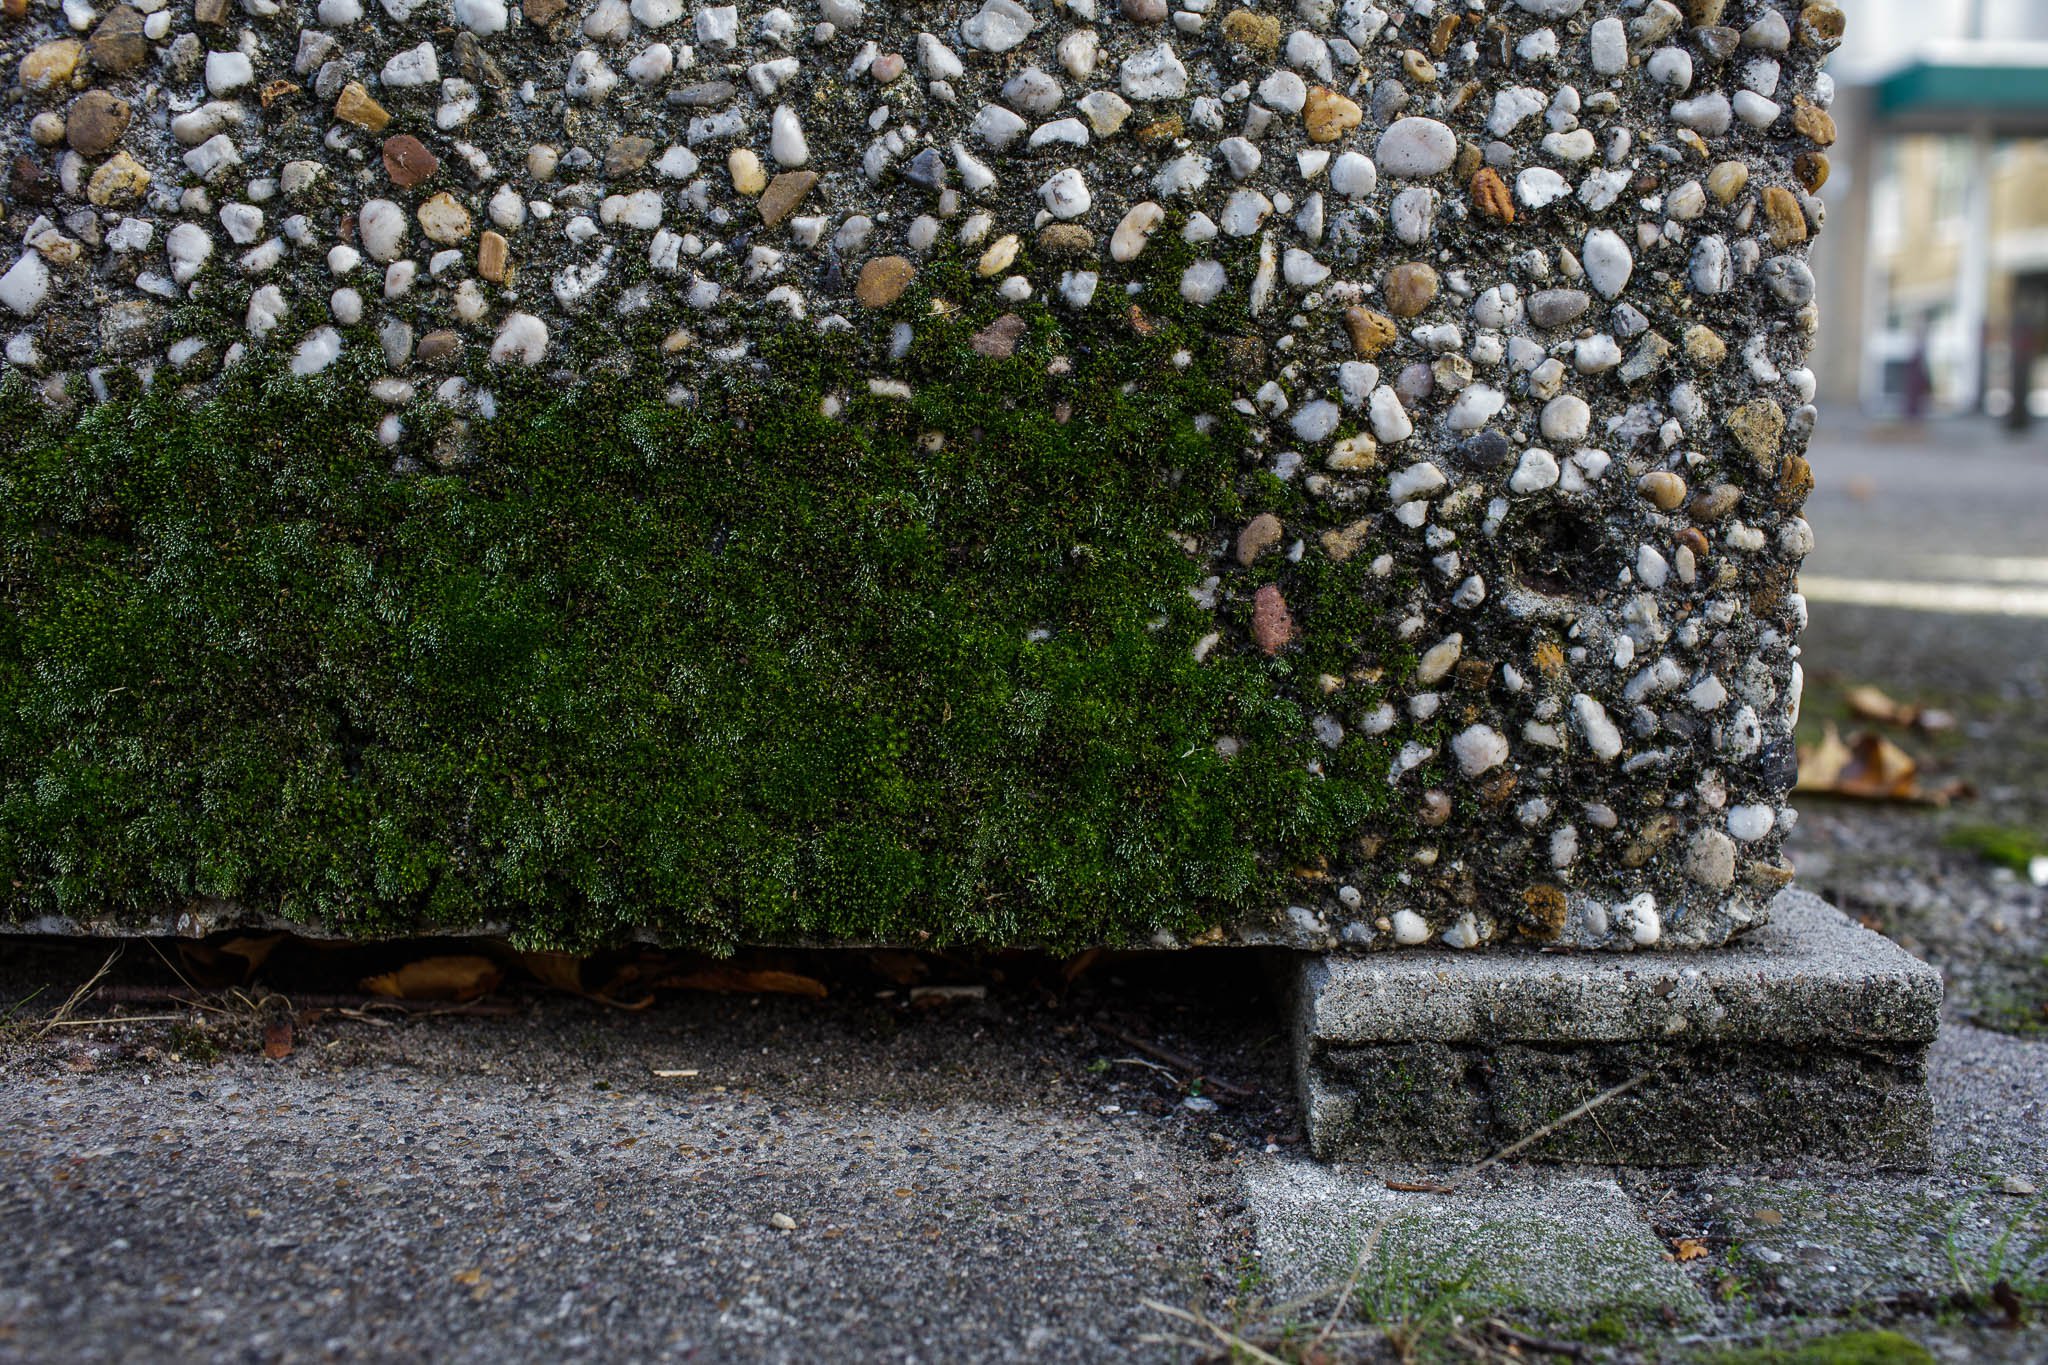 Biological niche for moss: microclimate of the slits at a garbage place.